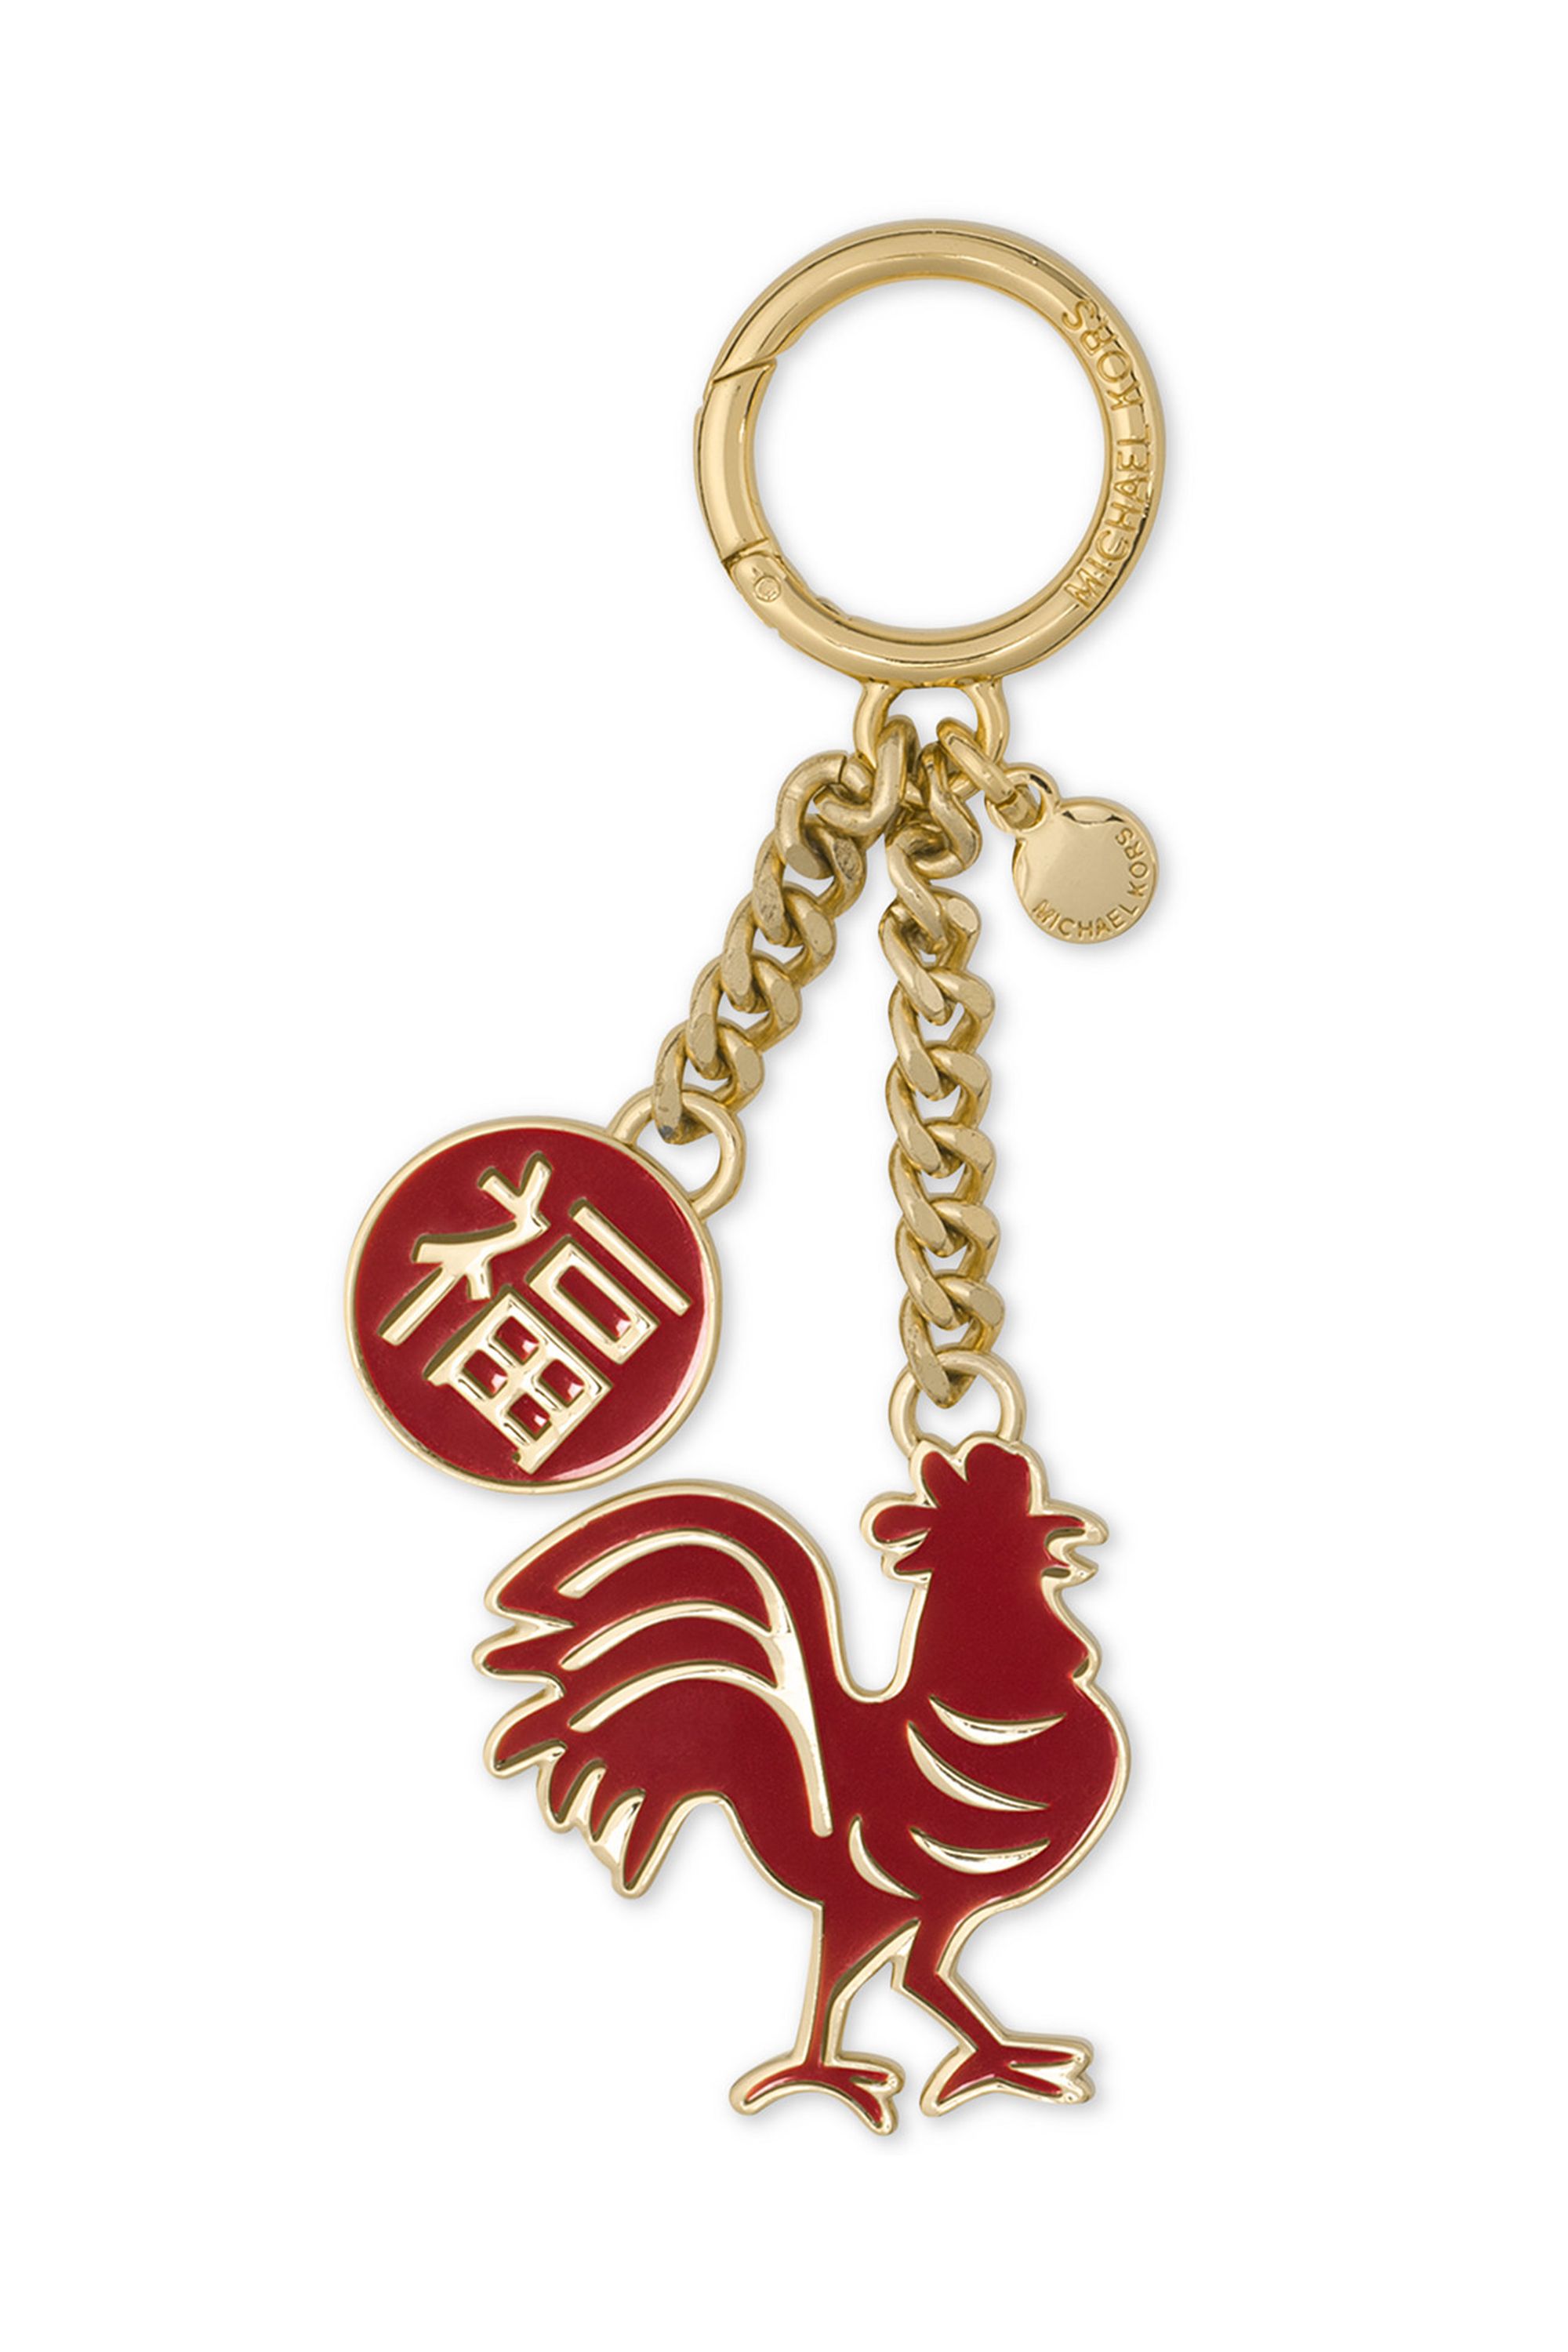 13 Stylish Ways to Celebrate the Year of the Rooster